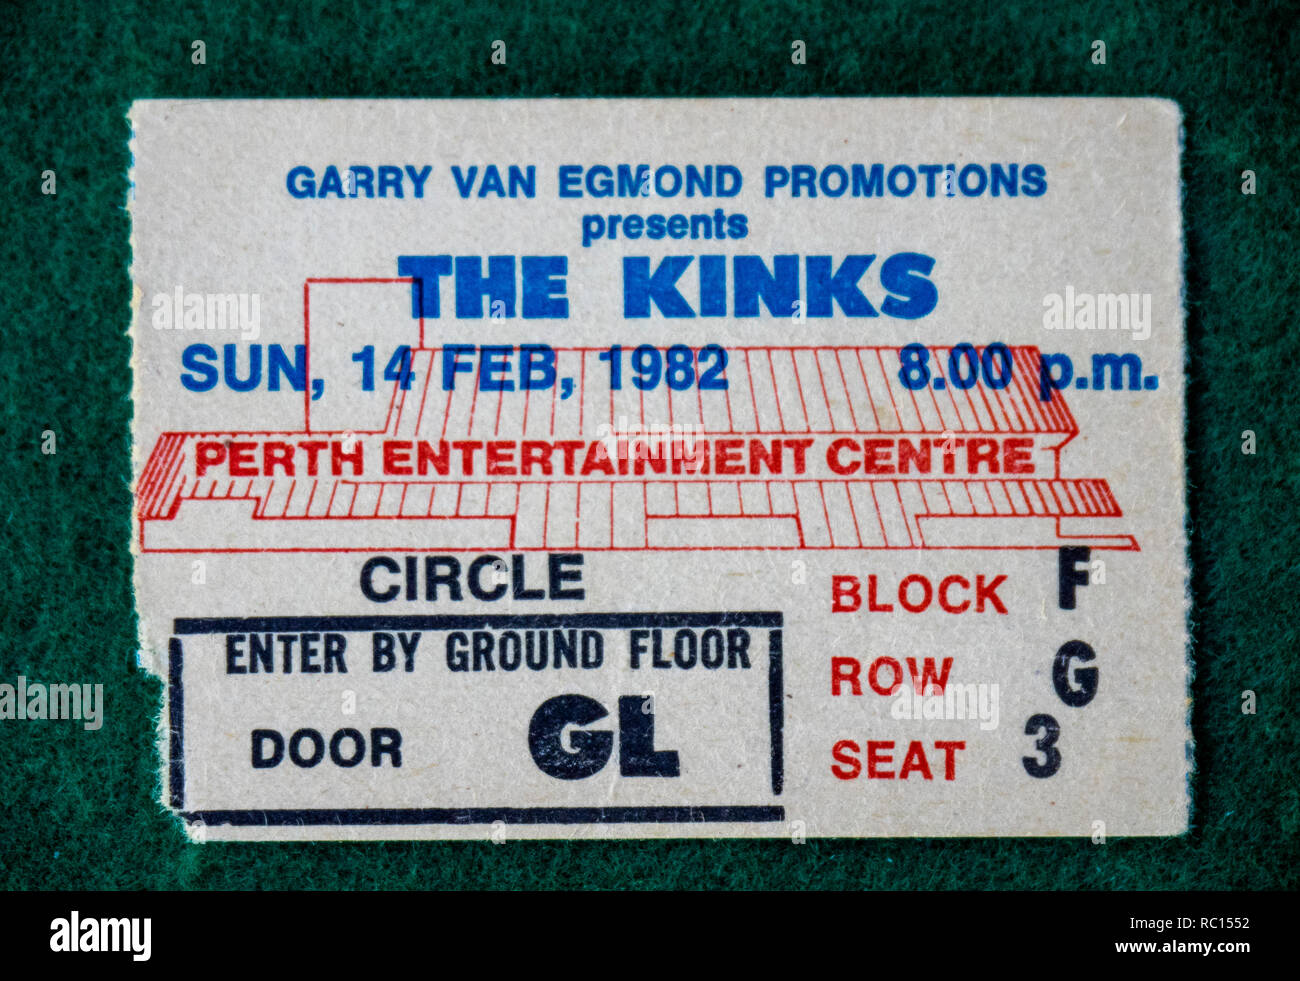 Ticket for The Kinks concert at Perth Entertainment Centre in 1982 WA Australia. Stock Photo